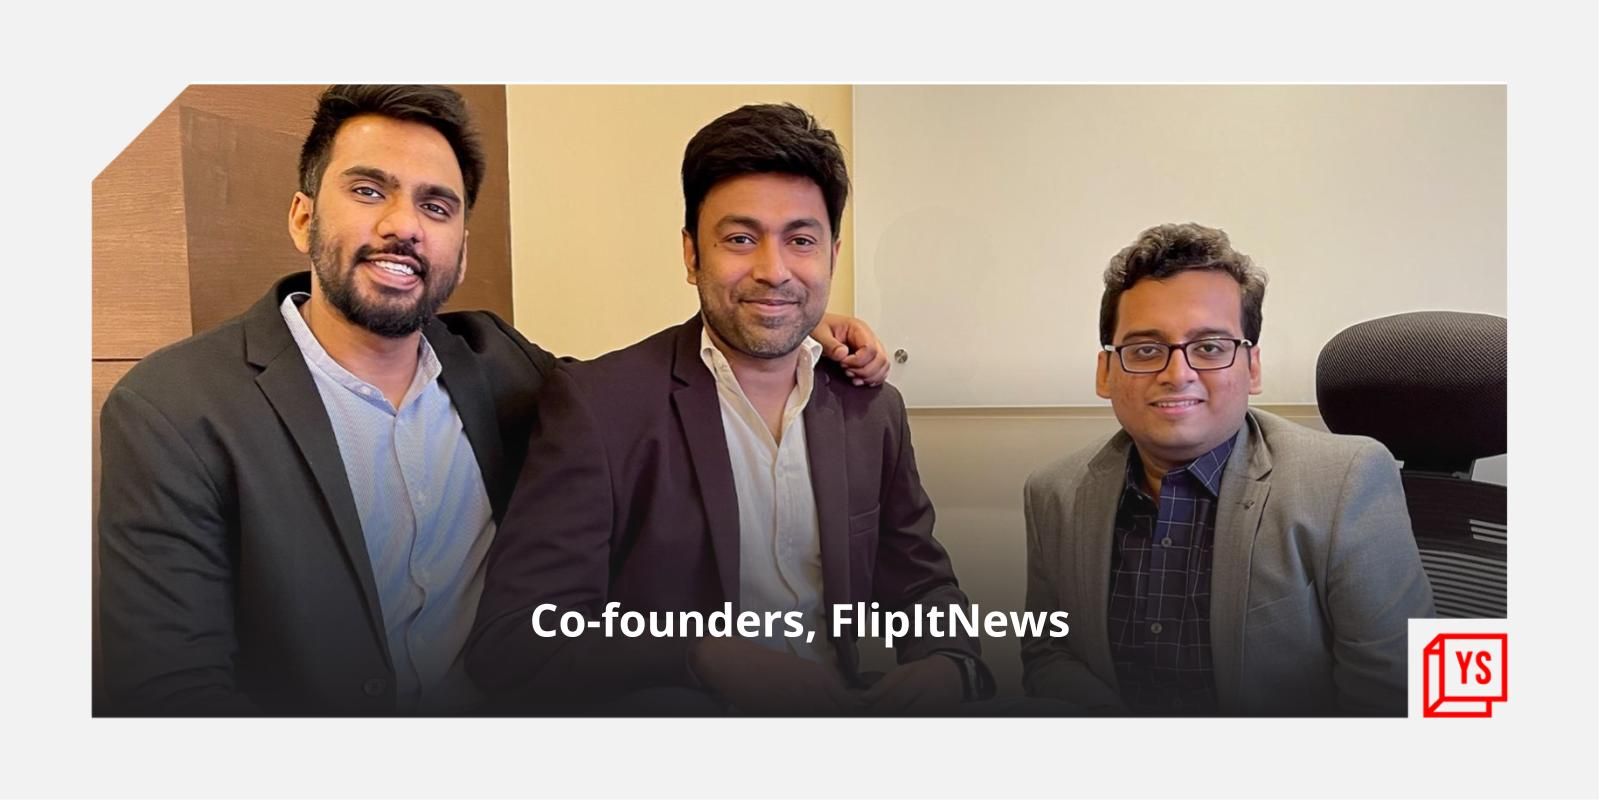 Flip into this app to know all about smart investments and the latest business news 